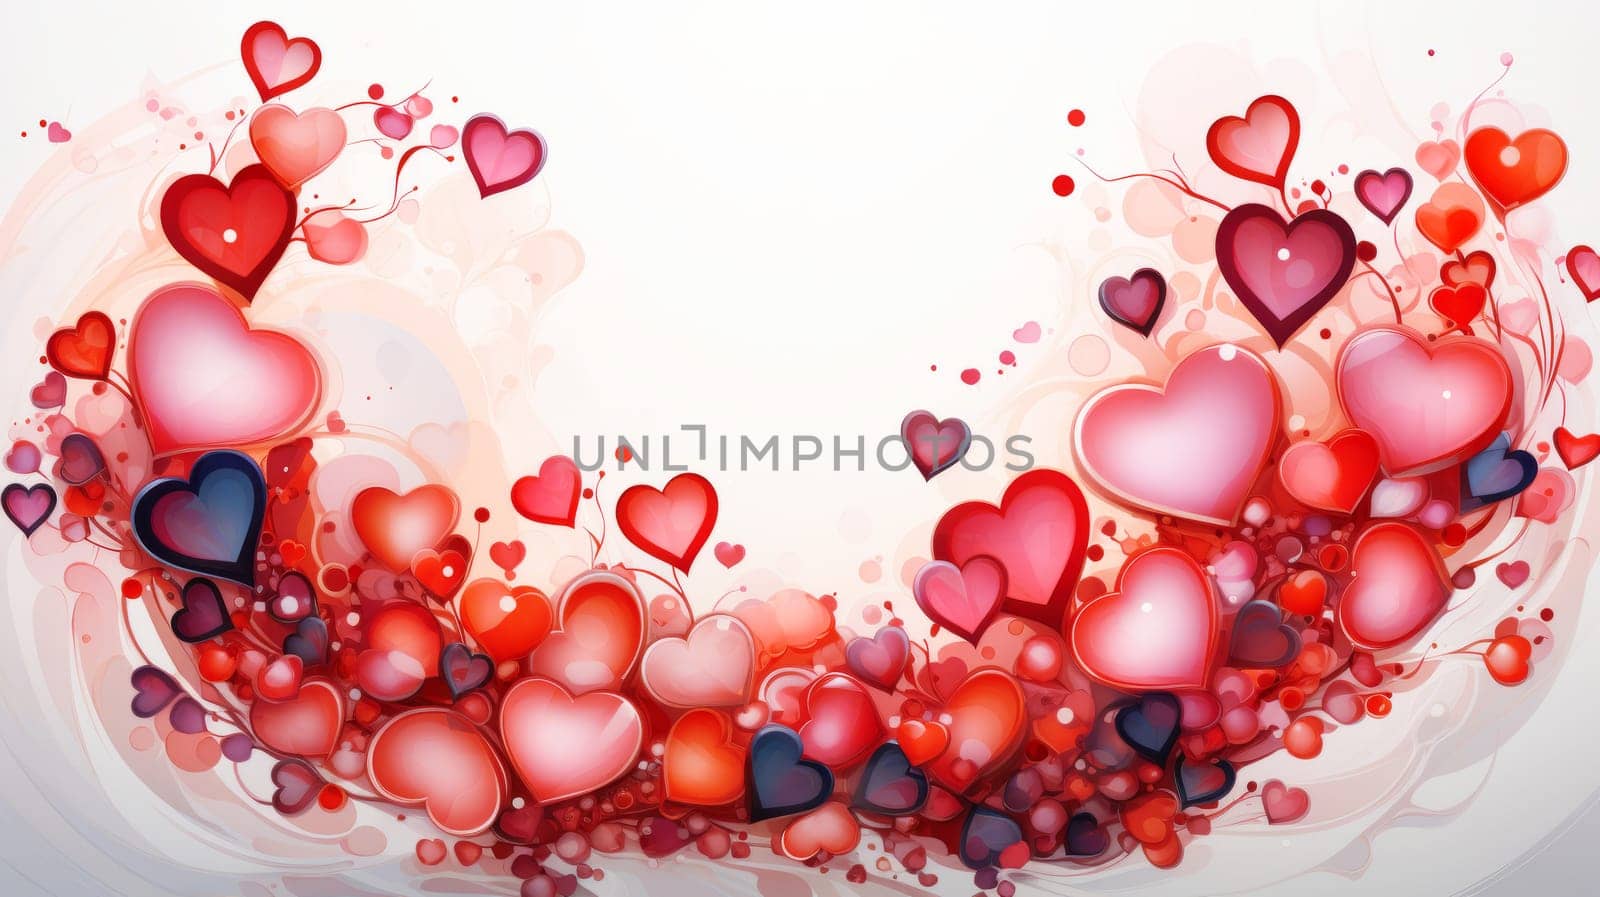 Valentine's Day composition. Hearts with place for text by NataliPopova